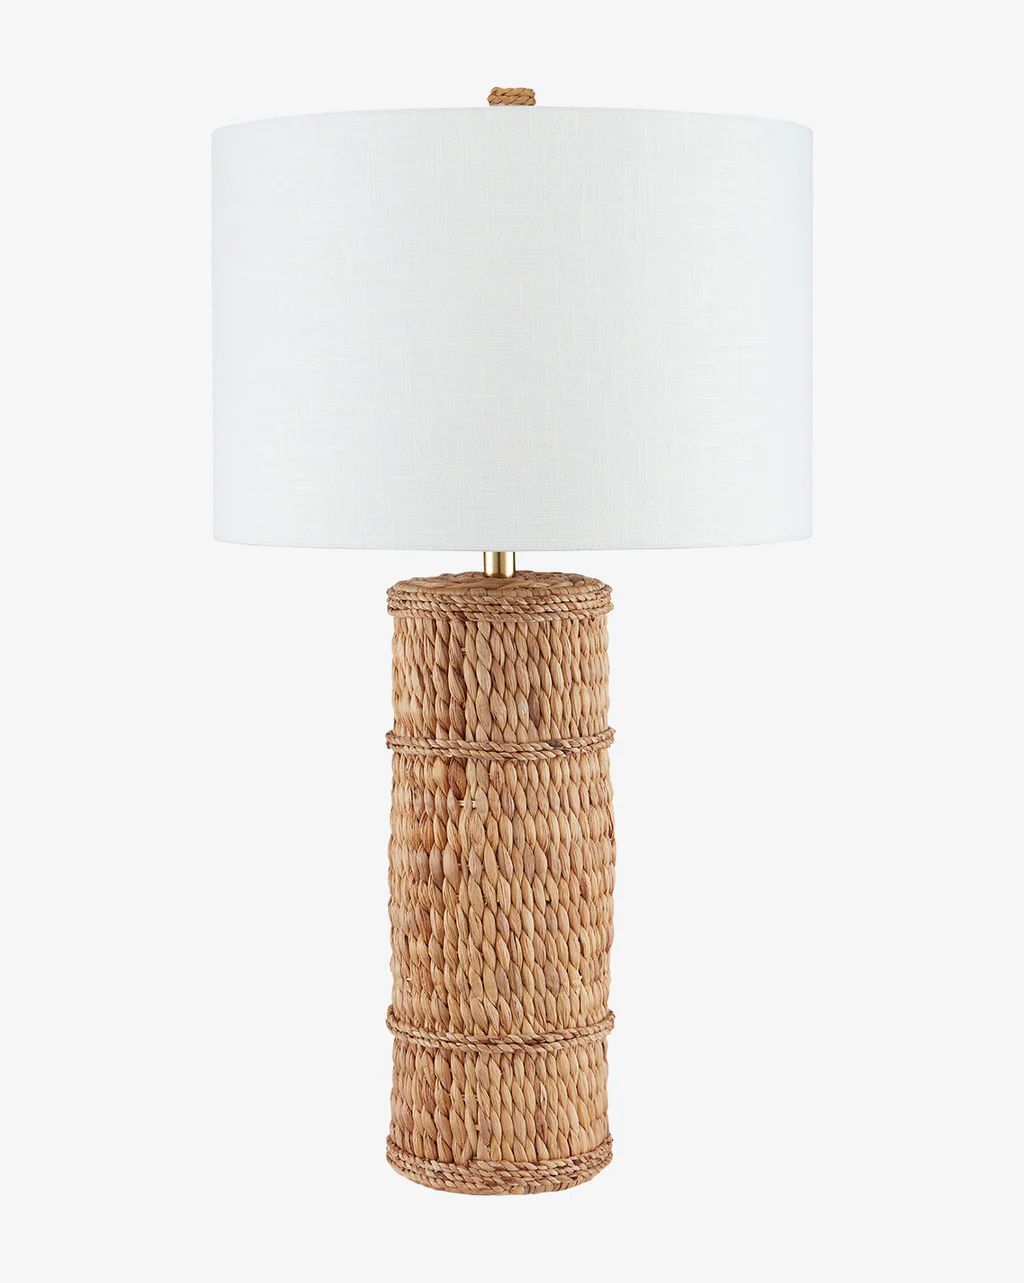 Azores Table Lamp | McGee & Co.